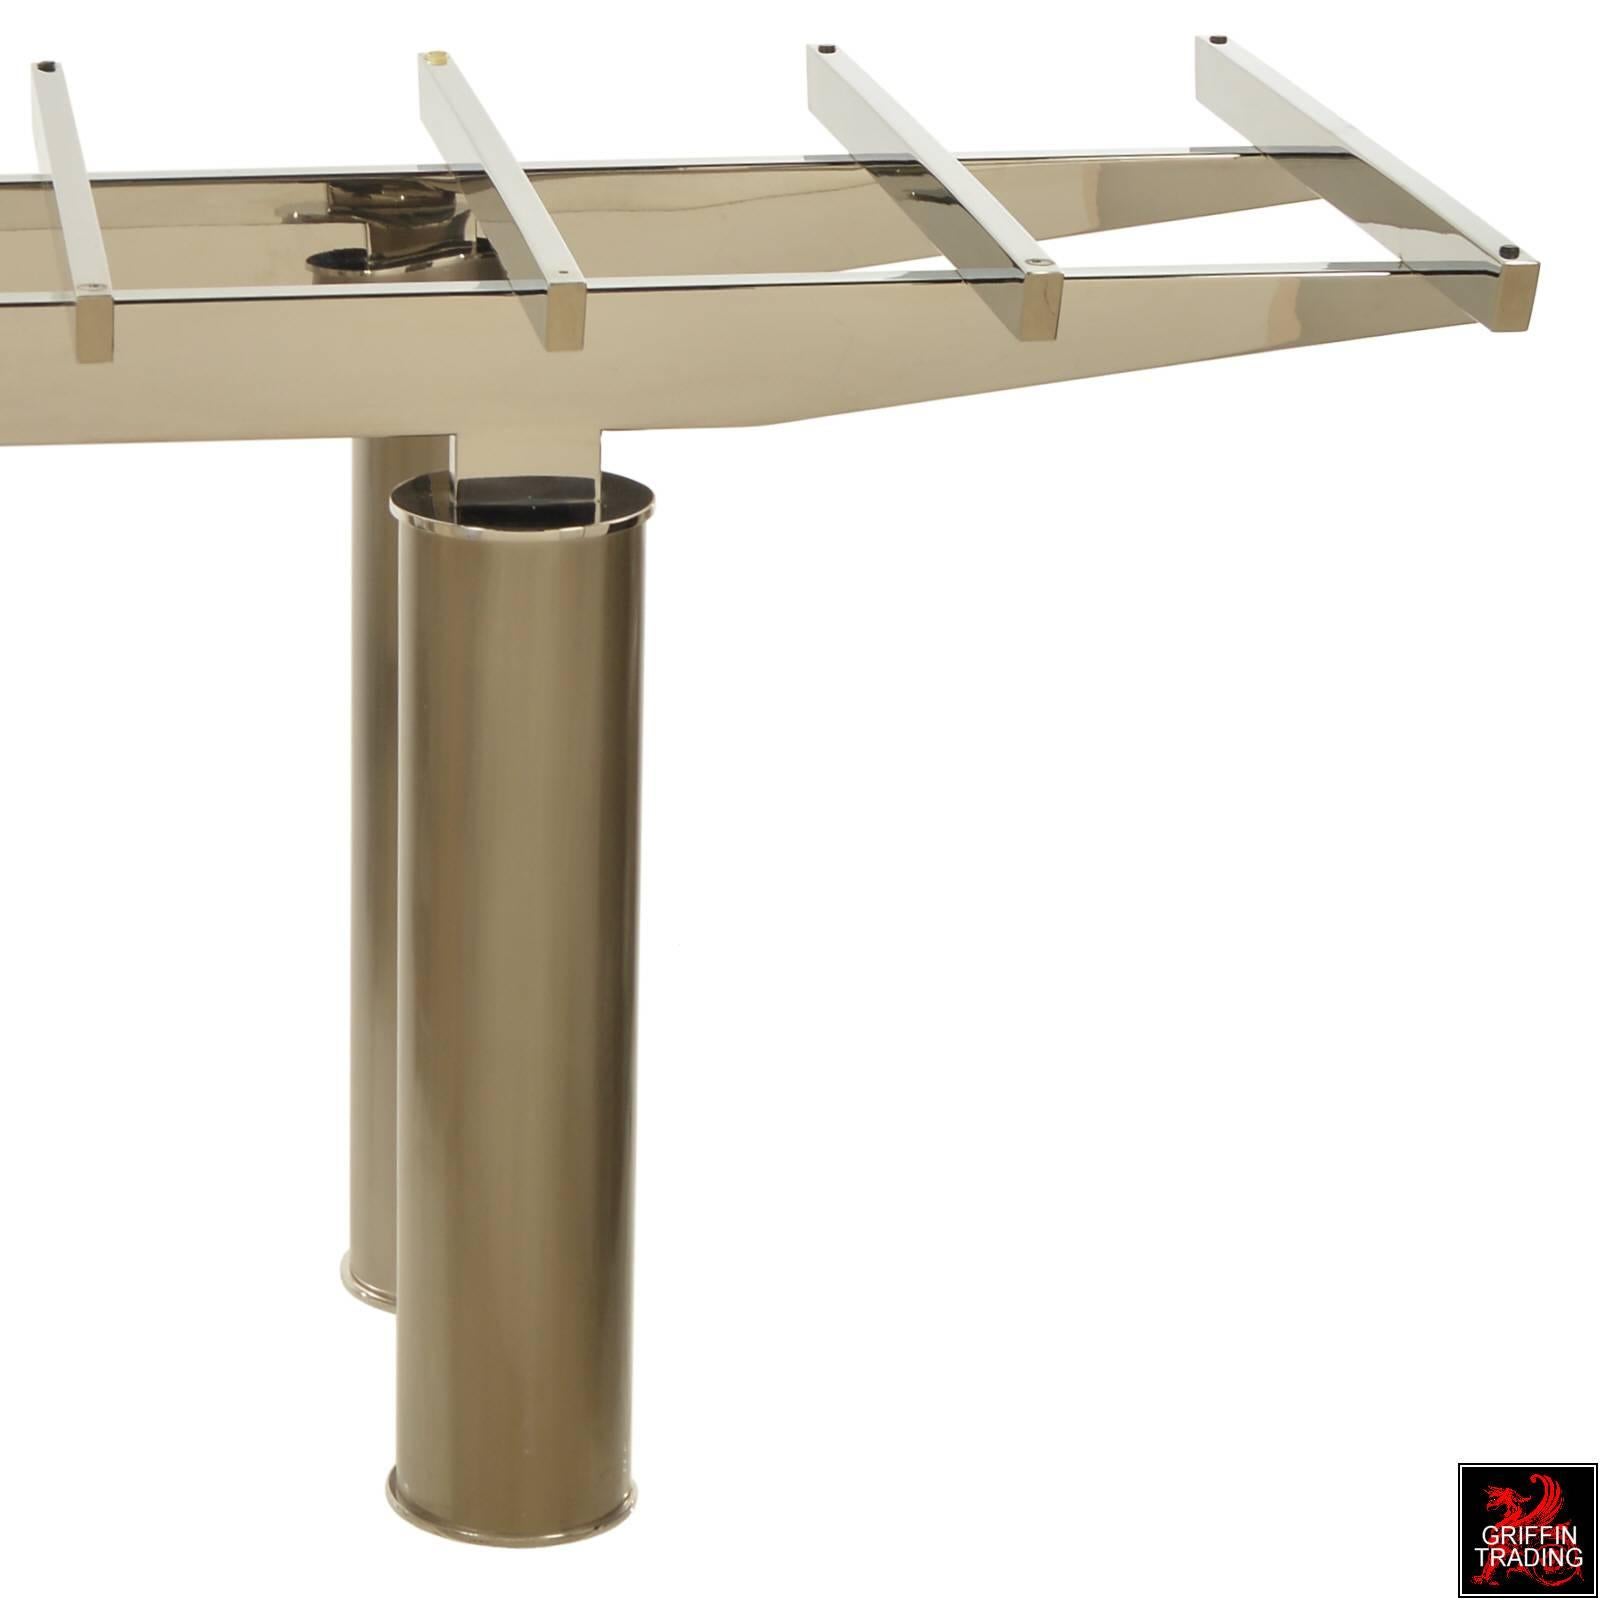 American Brueton Glass, Chrome and Stainless Steel Dining Table by Tamarkin-Techler Group For Sale